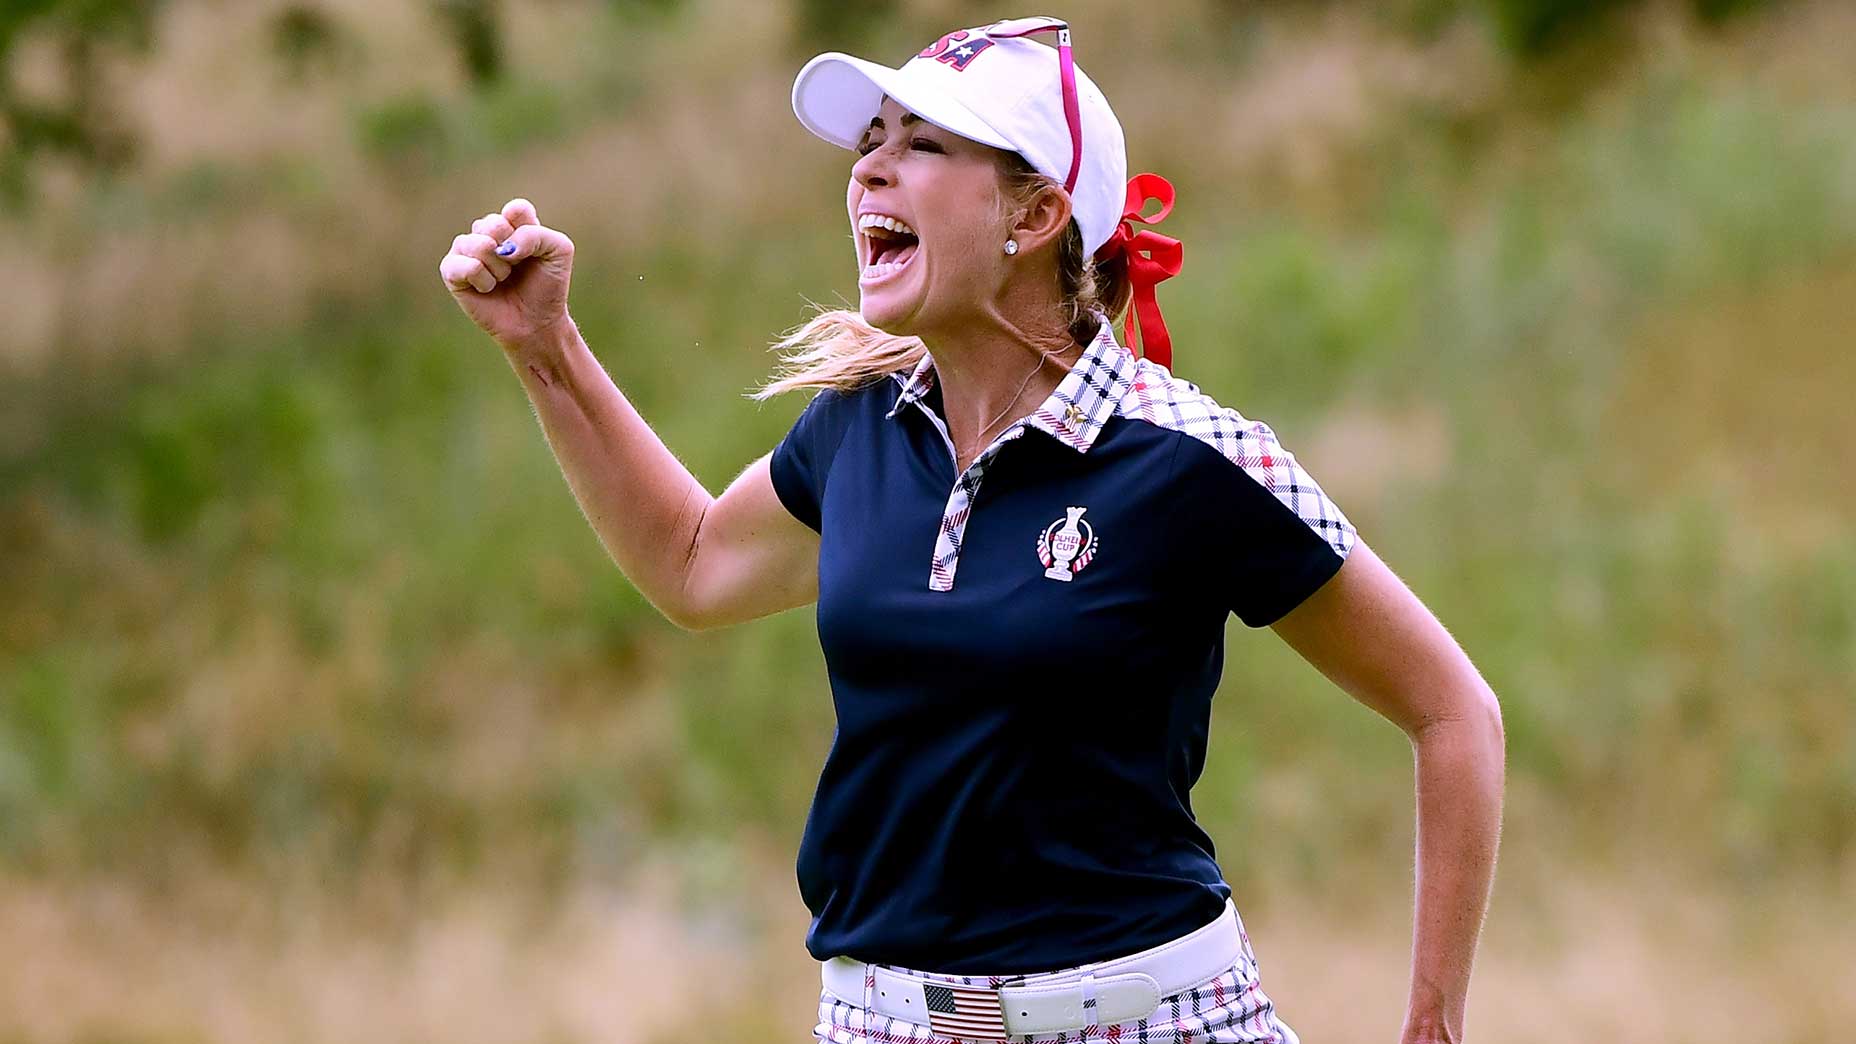 Paula Creamer celebrates after making a birdie putt during Sunday singles of the 2017 Solheim Cup.